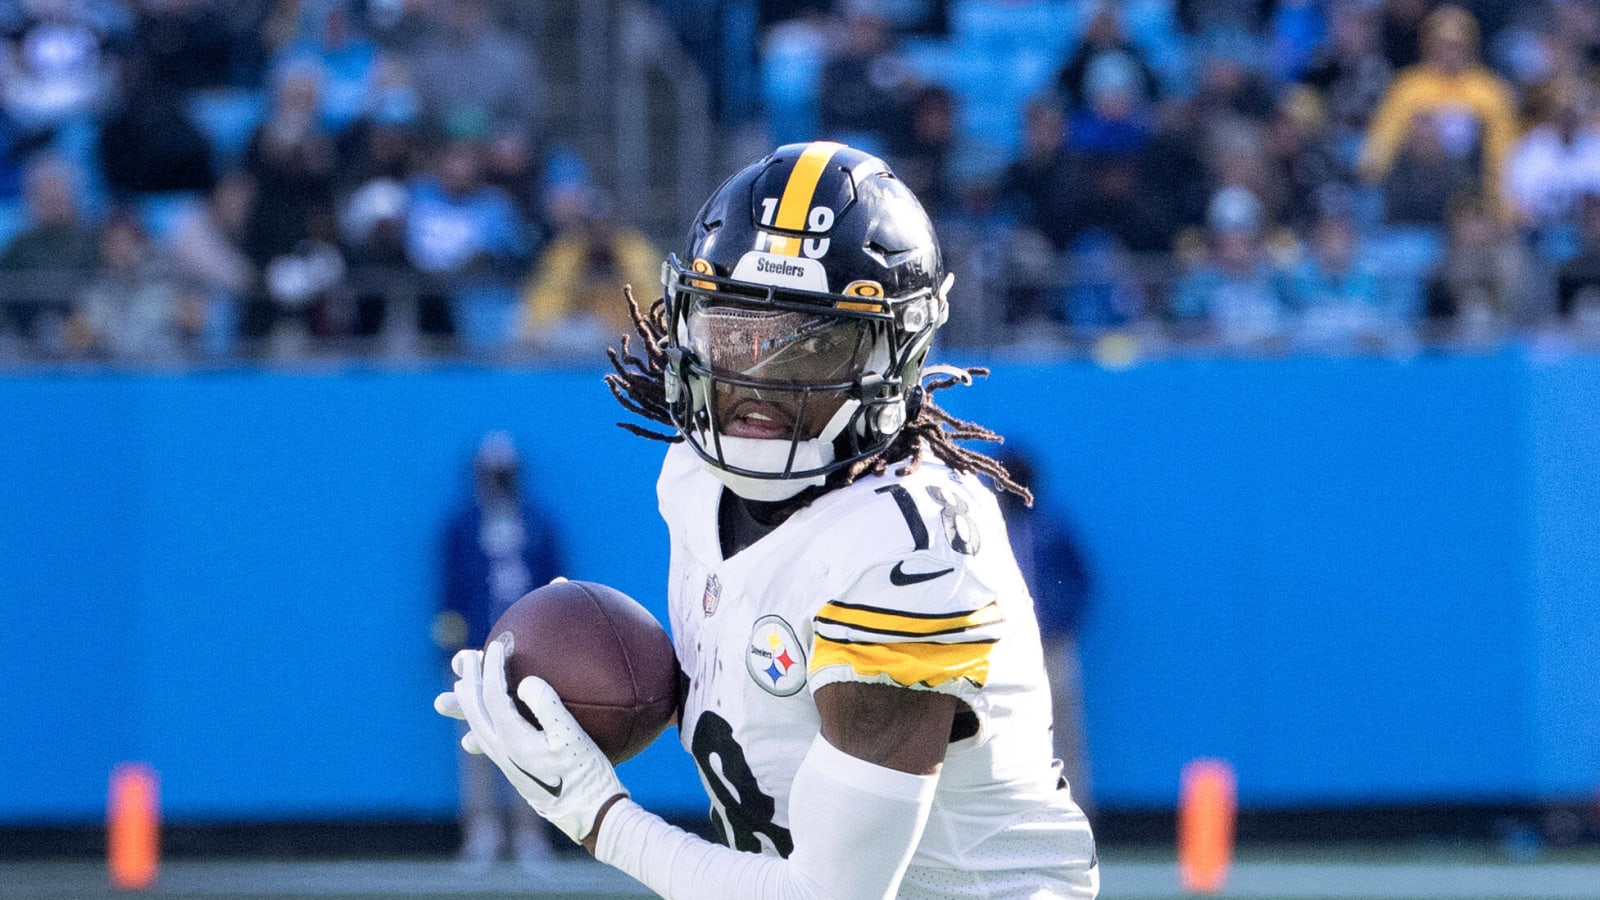 Steelers Diontae Johnson Had Something To Say About The Fines He And Marcus Allen Got Over Colossal Penalties During Week 16